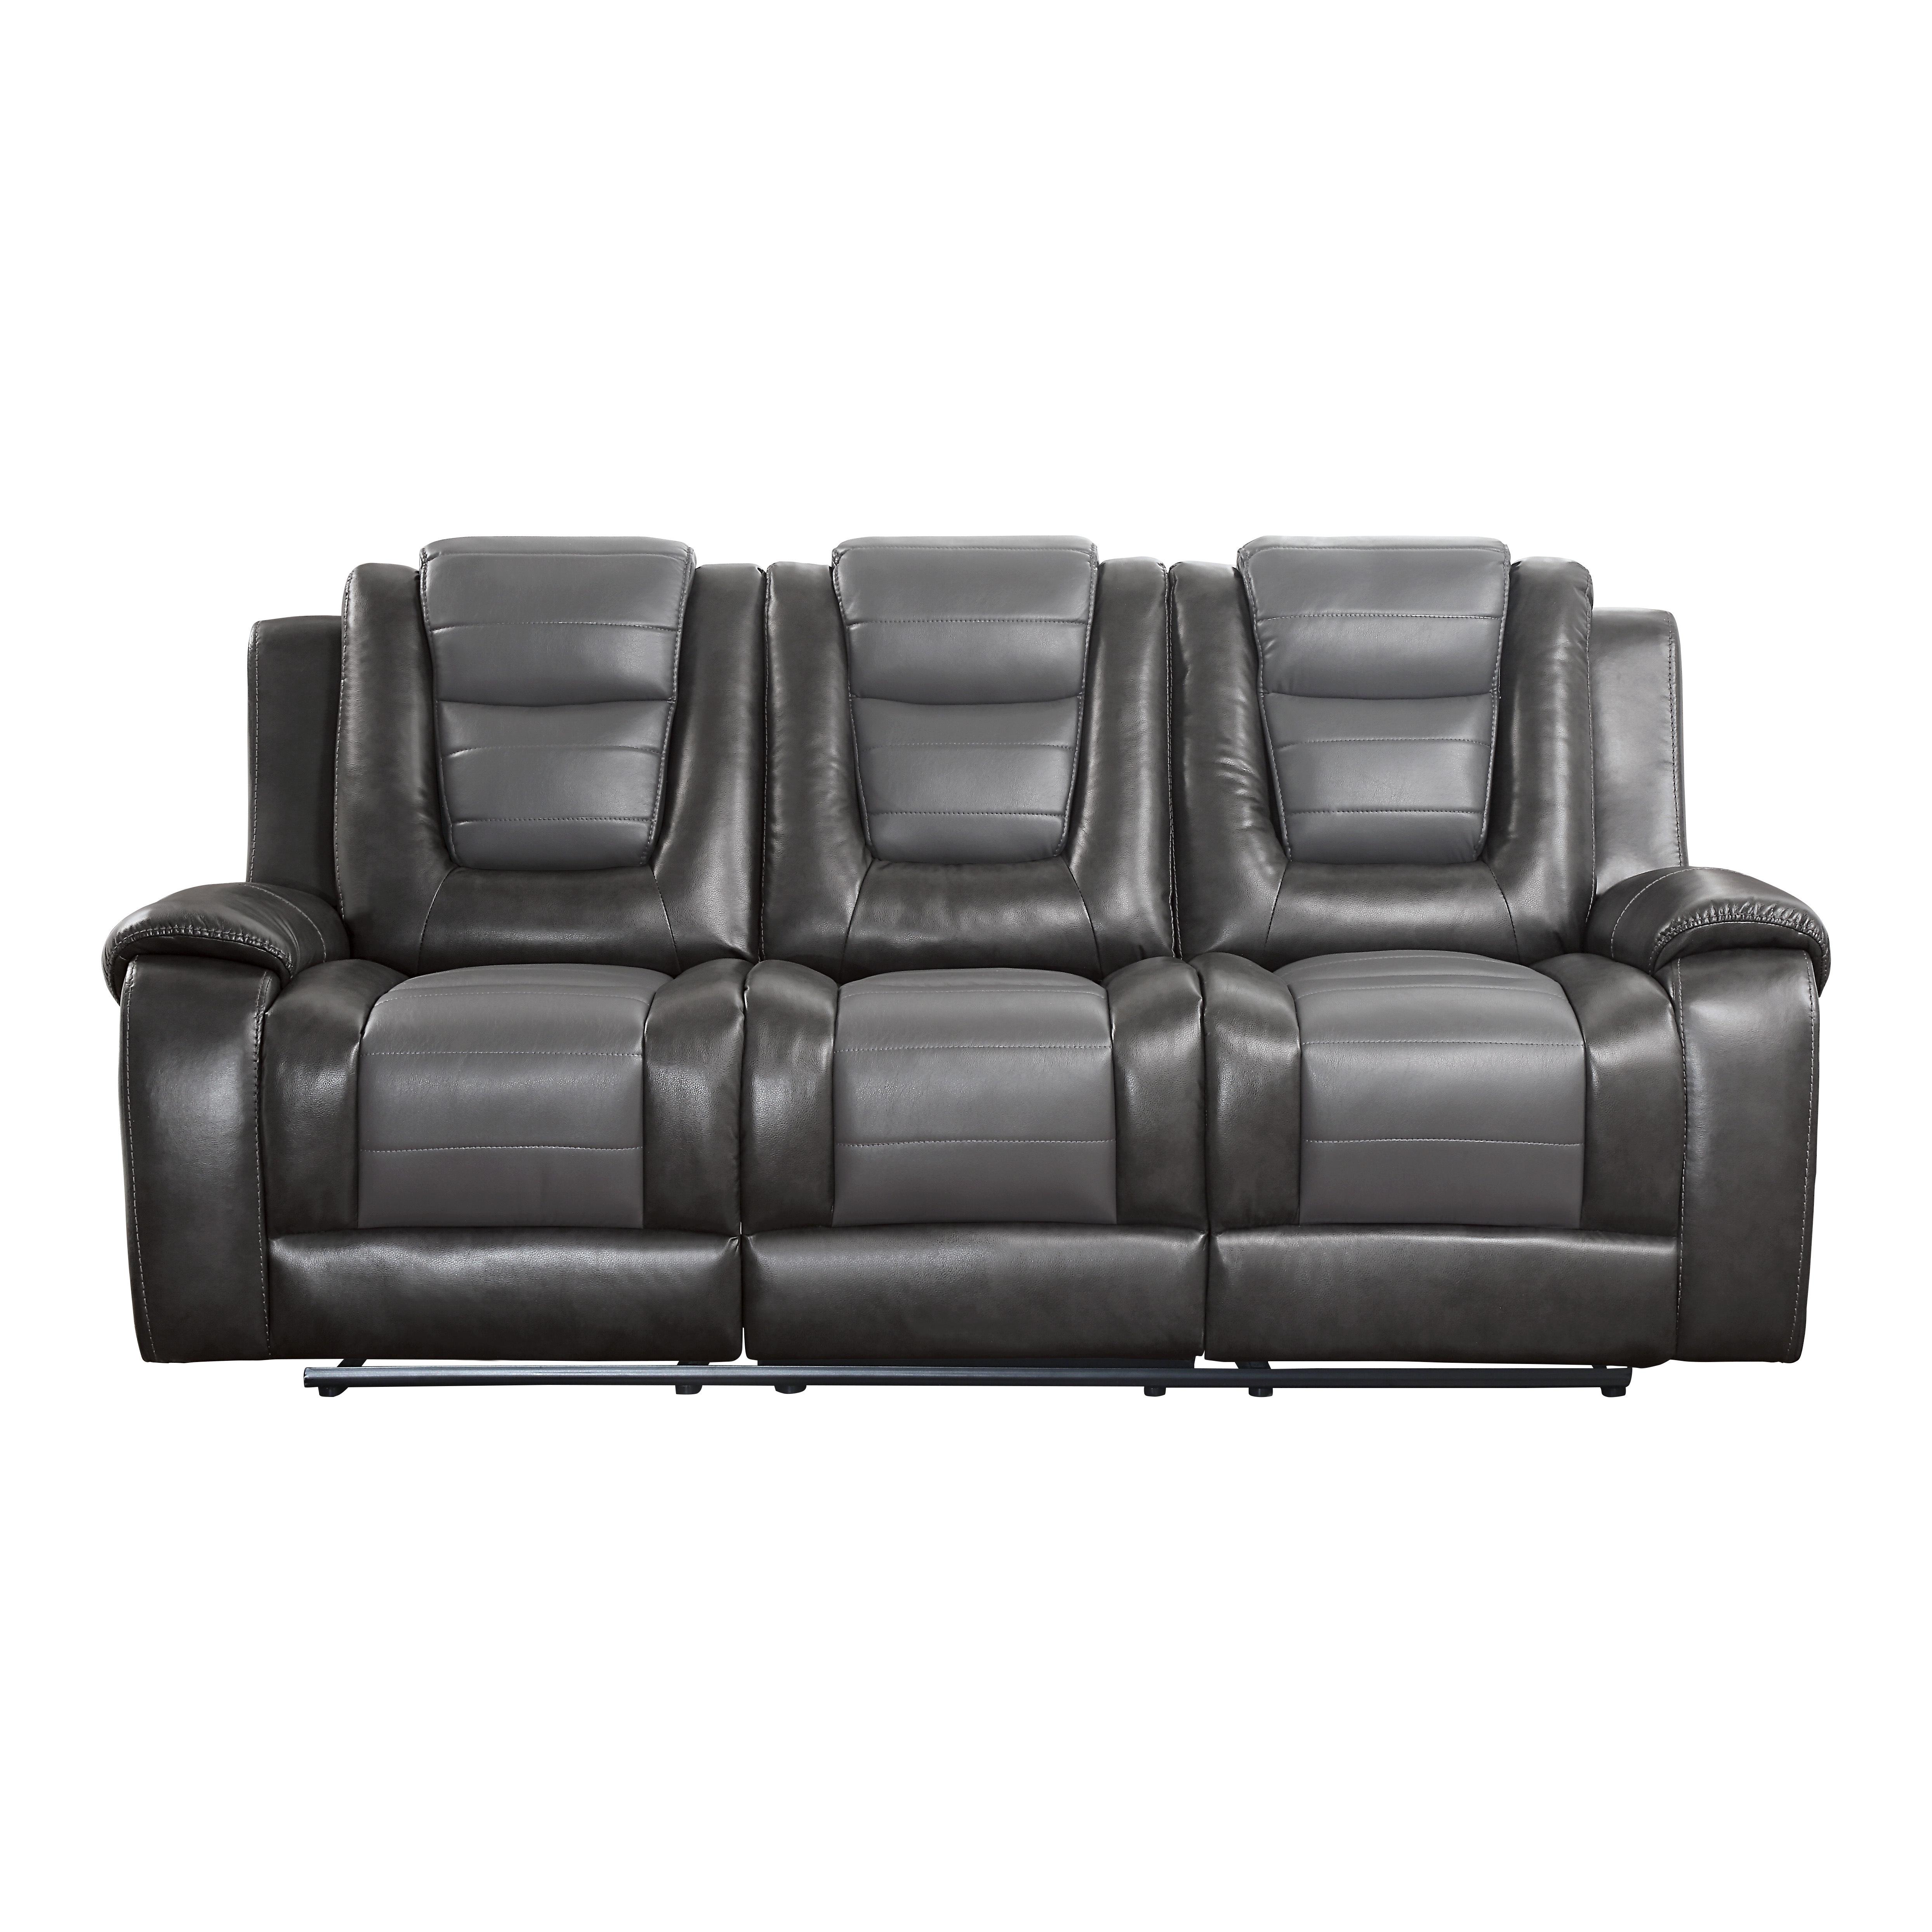 

    
Transitional Dark Gray & Light Gray Faux Leather Reclining Sofa Homelegance 9470GY-3 Briscoe
